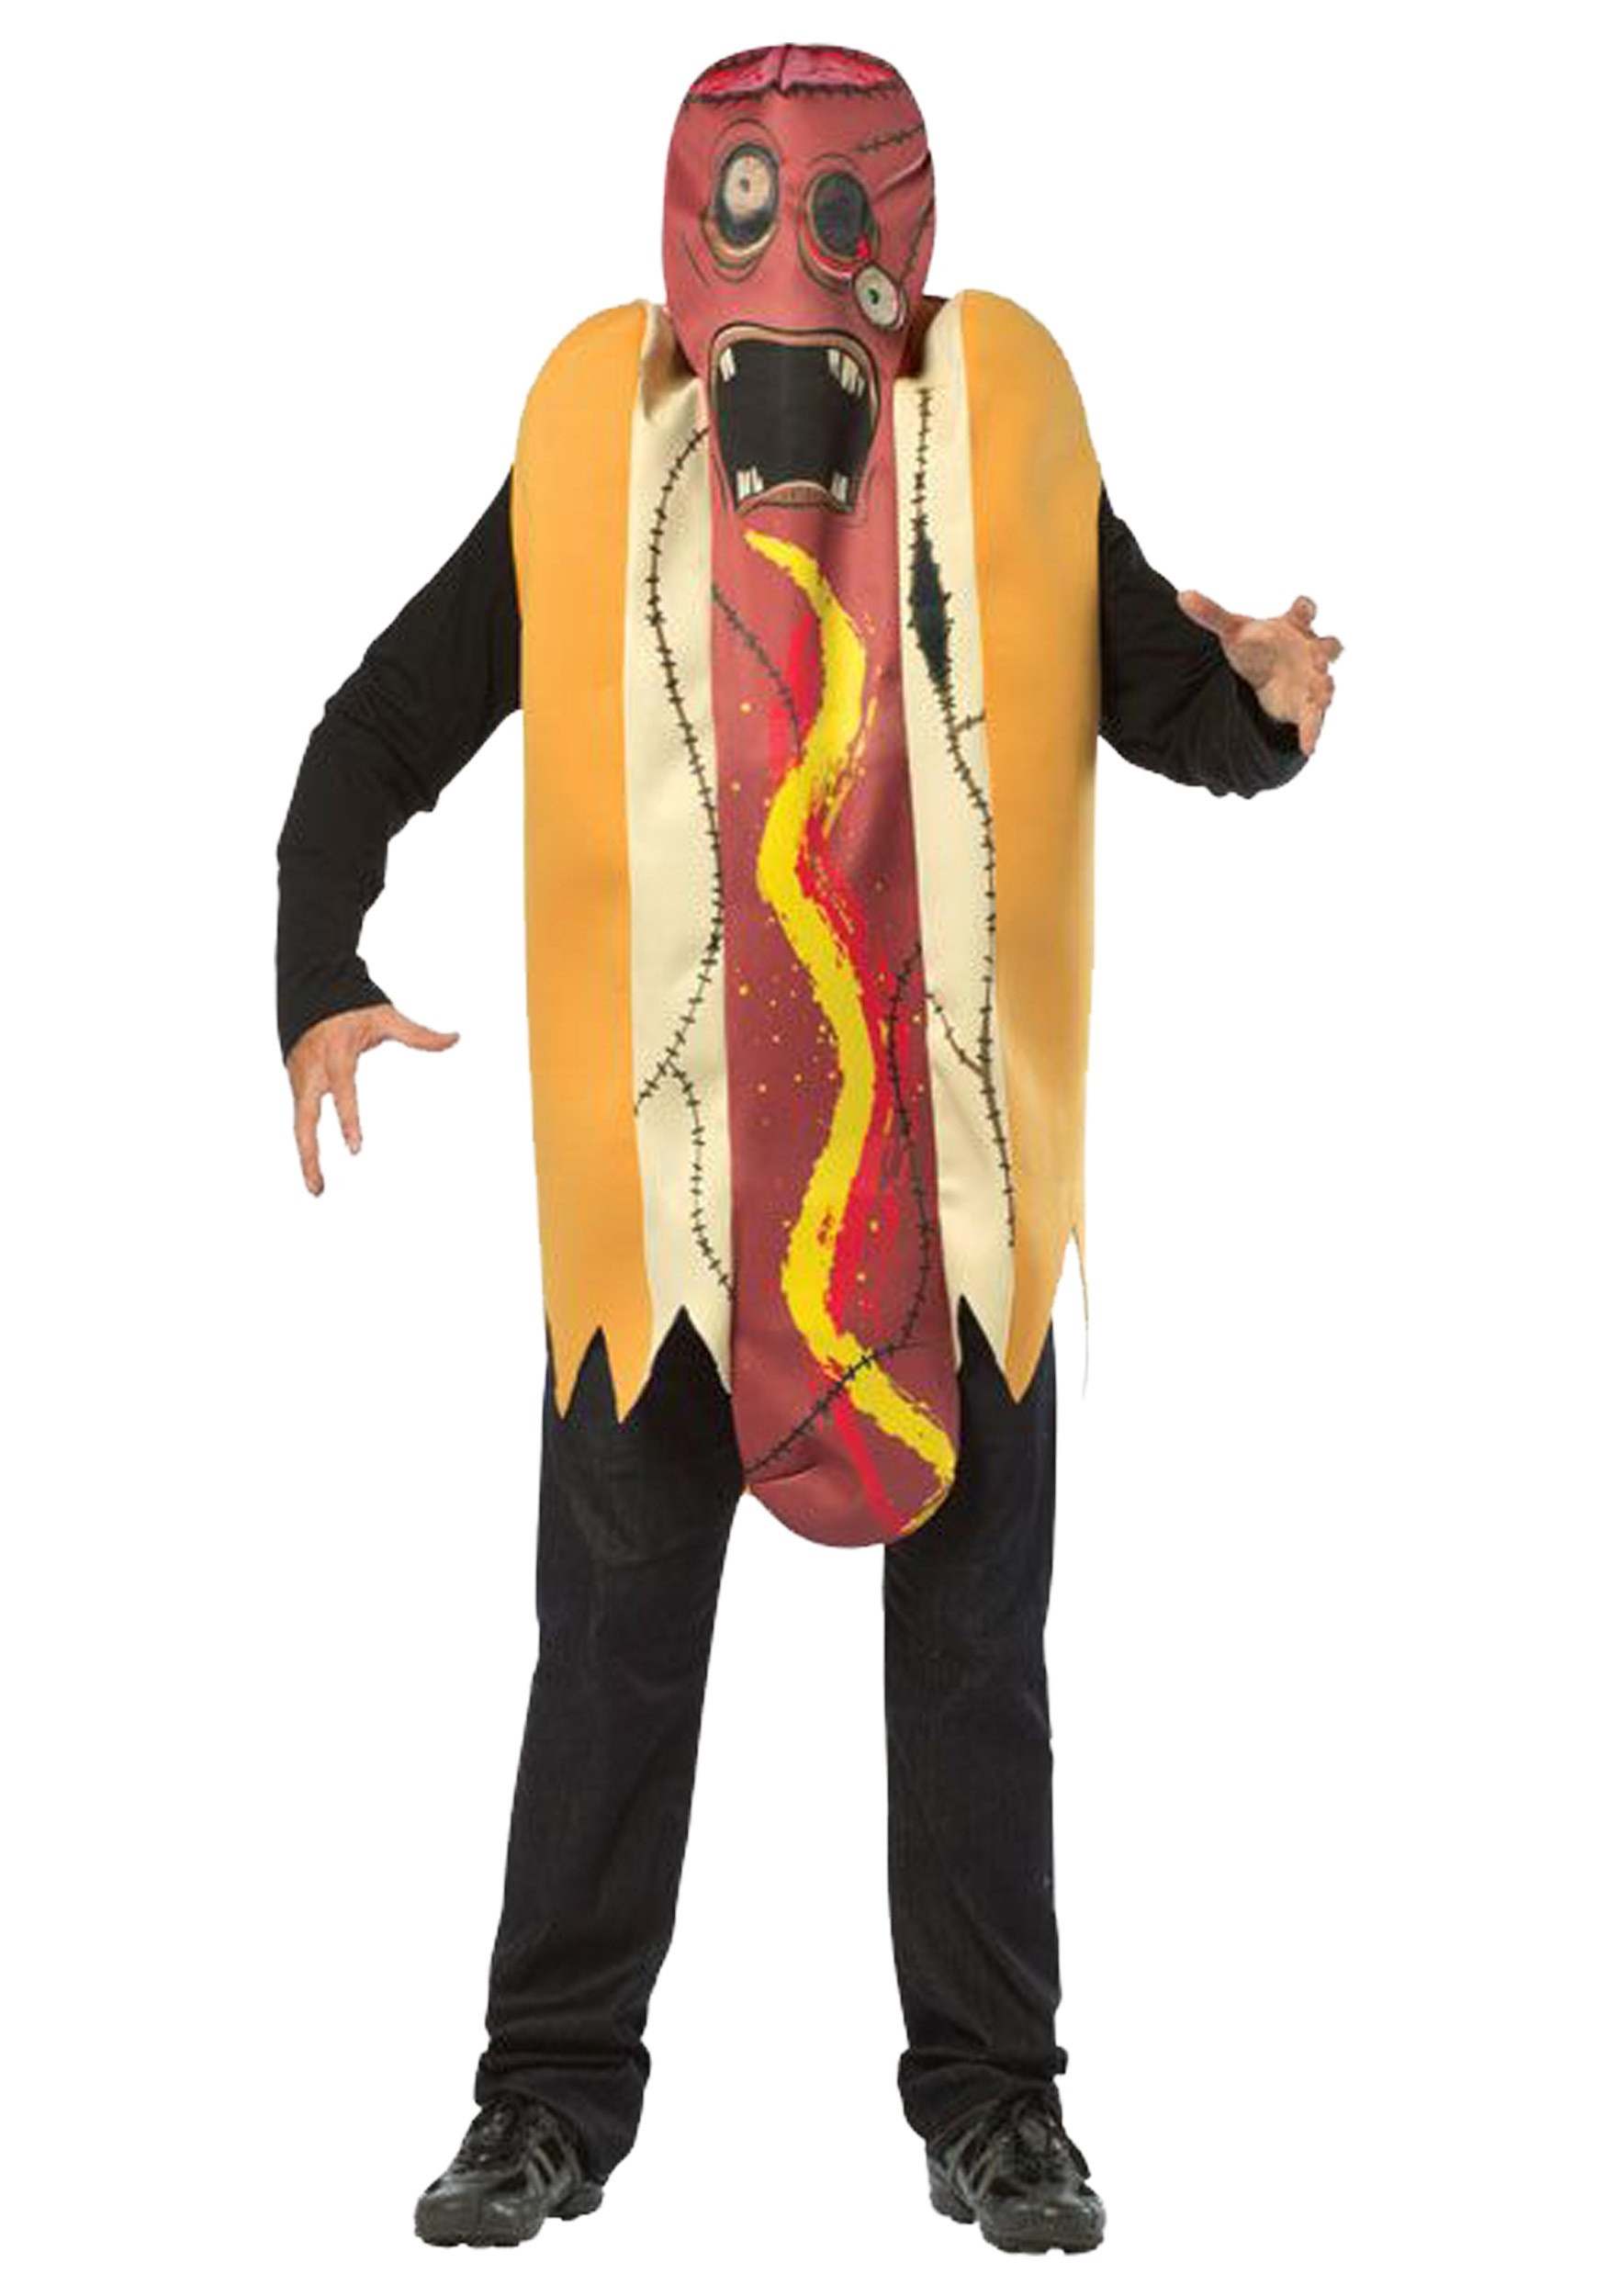 Hot Dog Halloween Costume For Dogs
 Adult Zombie Hot Dog Costume